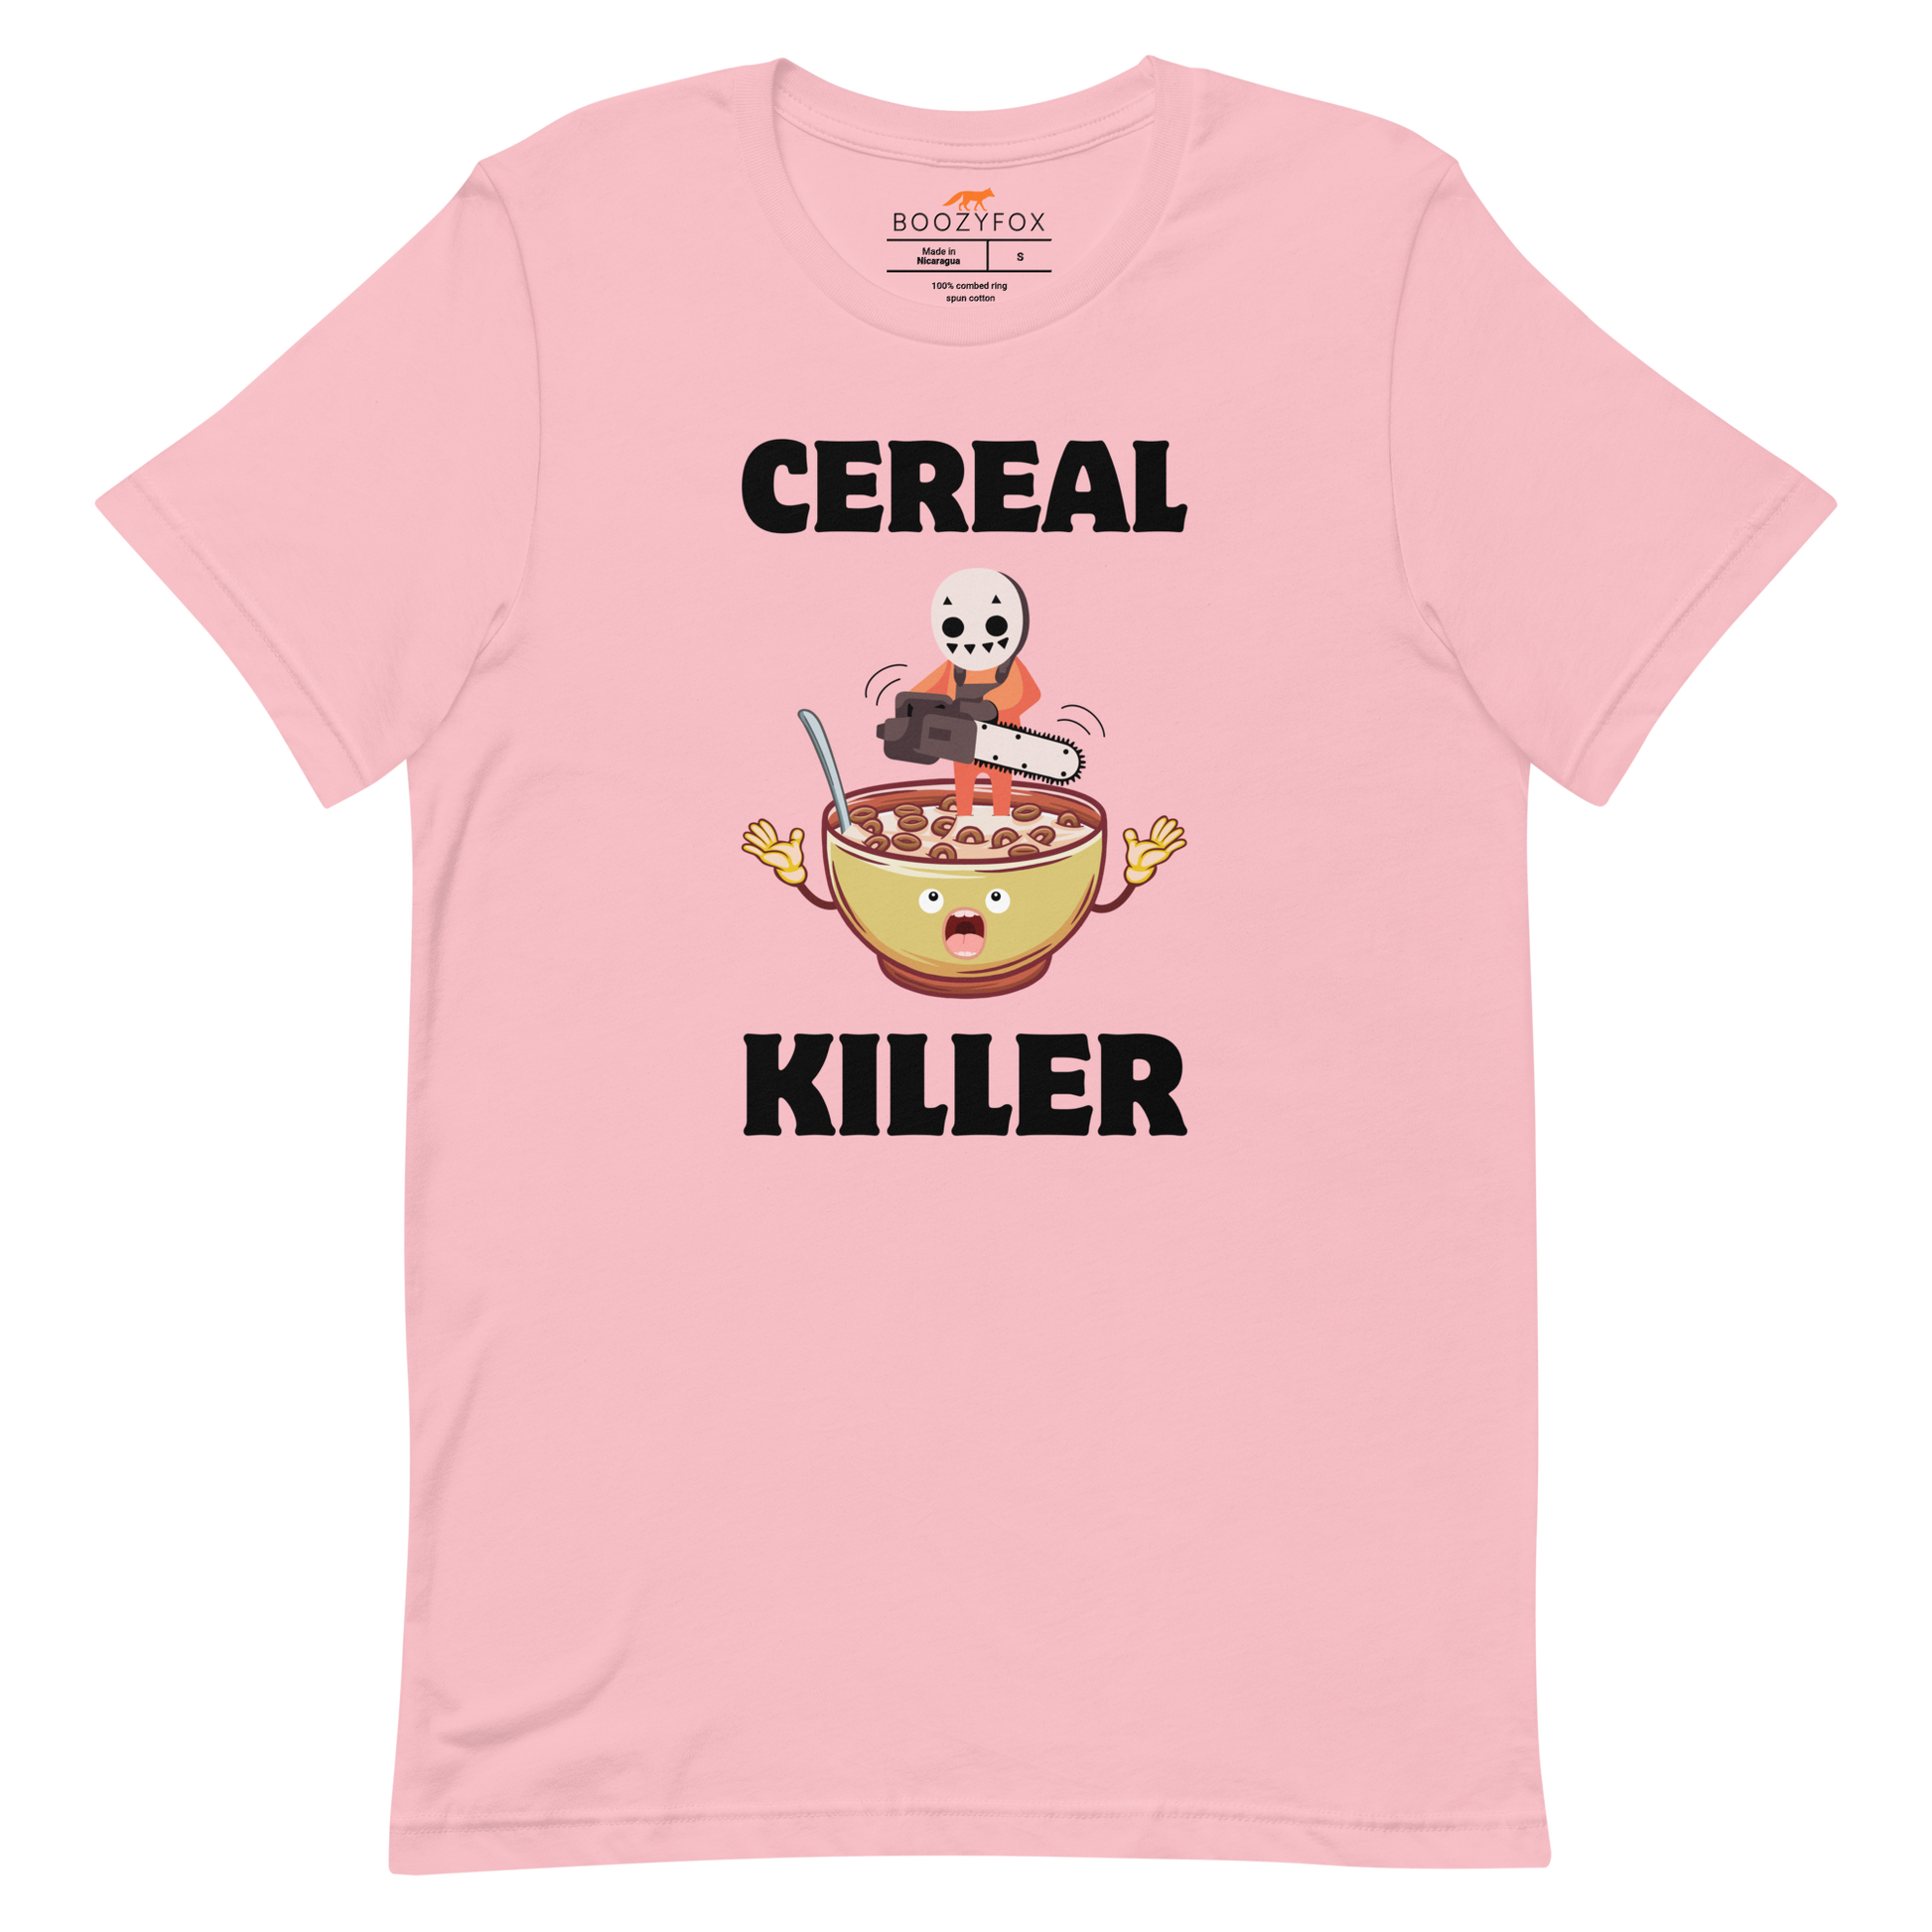 Pink Premium Cereal Killer Tee featuring a Cereal Killer graphic on the chest - Funny Graphic Tees - Boozy Fox